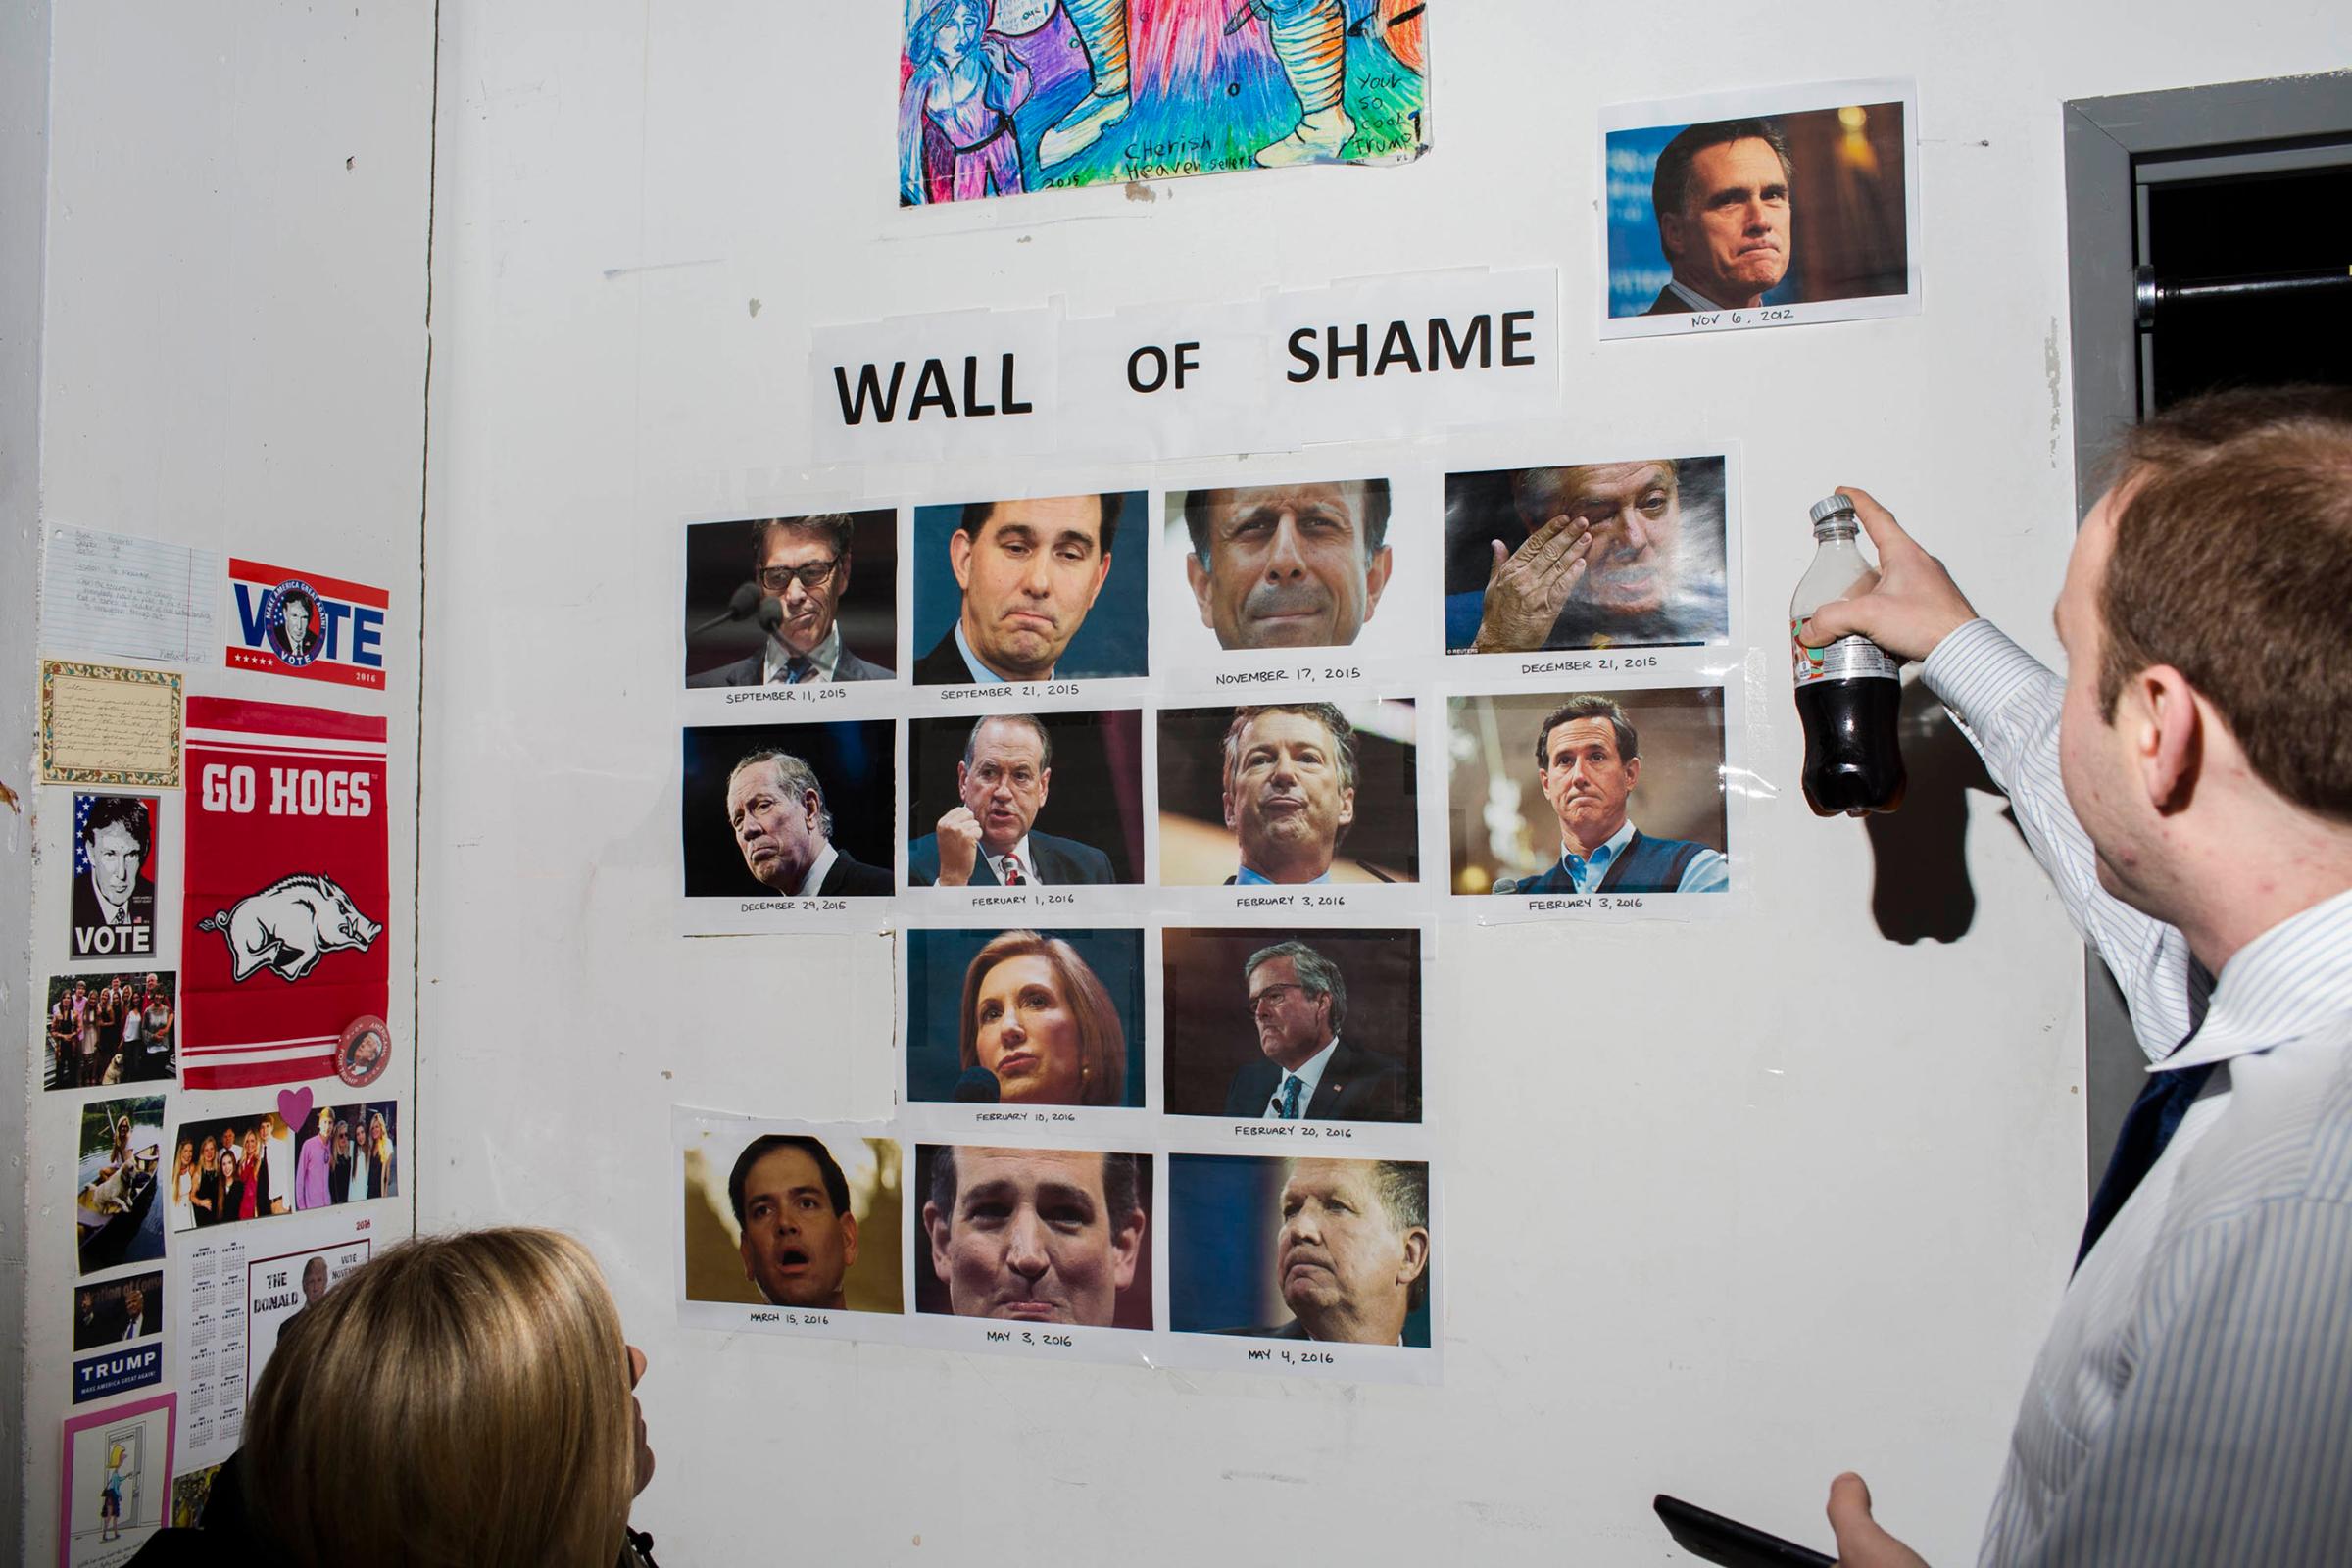 The wall of shame featuring Republican leaders who have criticized Trump, like former presidential candidate Mitt Romney inside the campaign headquarters of Donald Trump in New York City, on May 24, 2016.